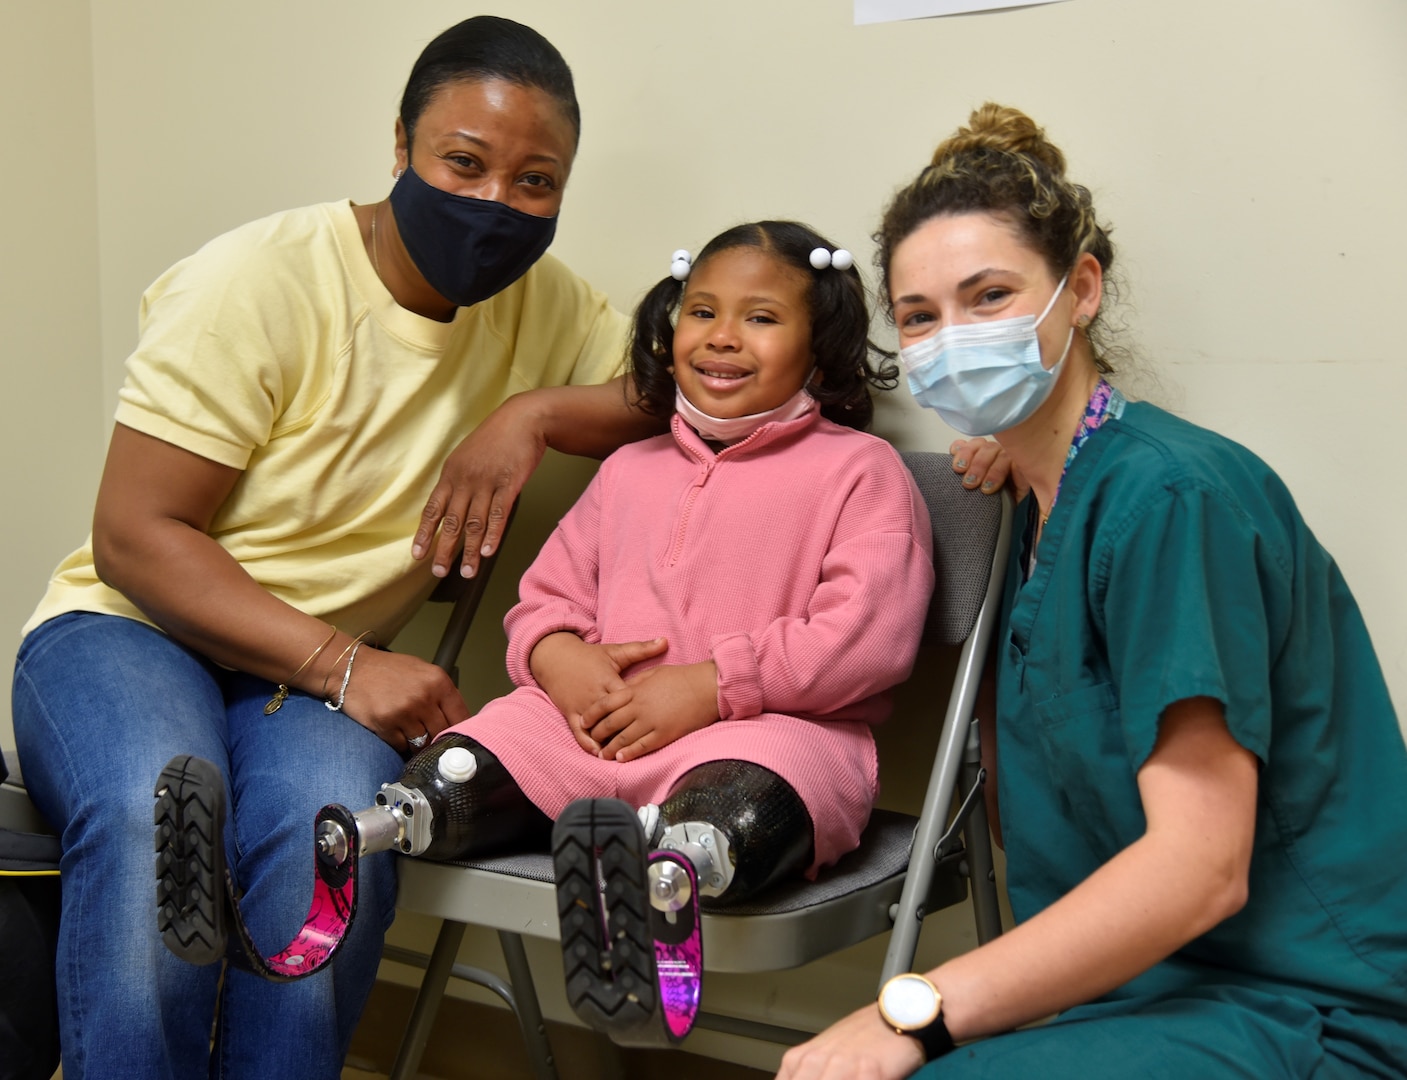 Paisley Minor, center, poses for a photo with her mom United States Marine Corps. Maj. Paige Thomas, left, and Jaime Boehm, a prosthetist at Walter Reed National Military Medical Center (WRNMMC) in Bethesda, Maryland, April 20, 2022. Paisley and her mom come to WRNMMC often to receive prosthetics maintenance and support.